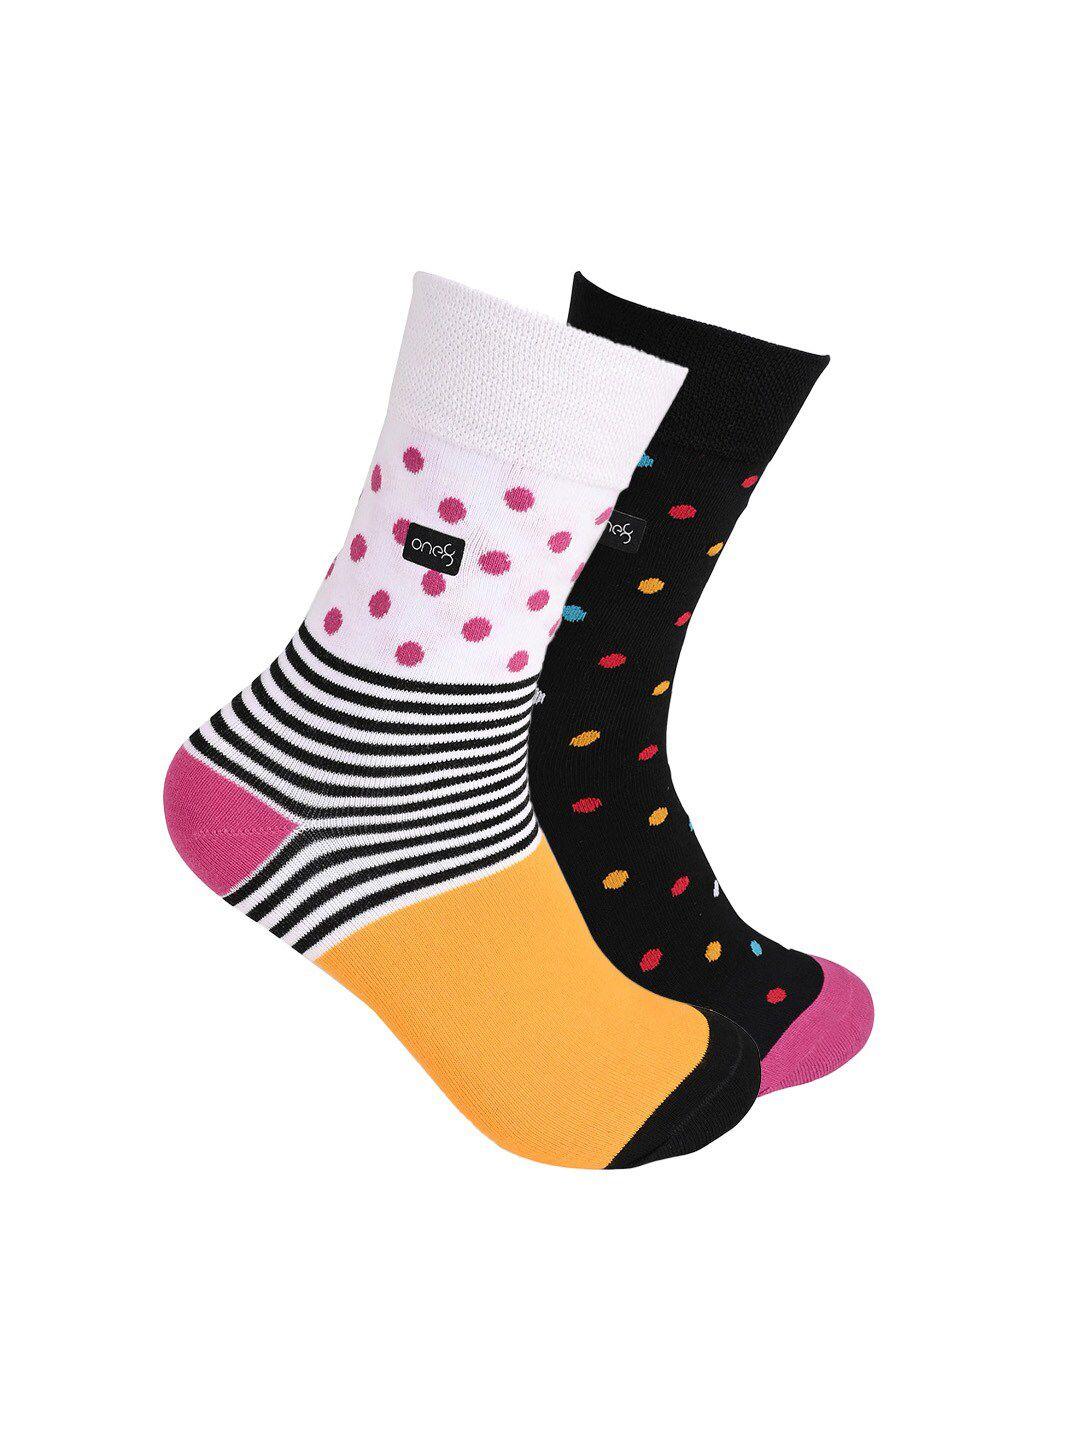 one8-men-pack-of-2-assorted-printed-cotton-calf-length-socks